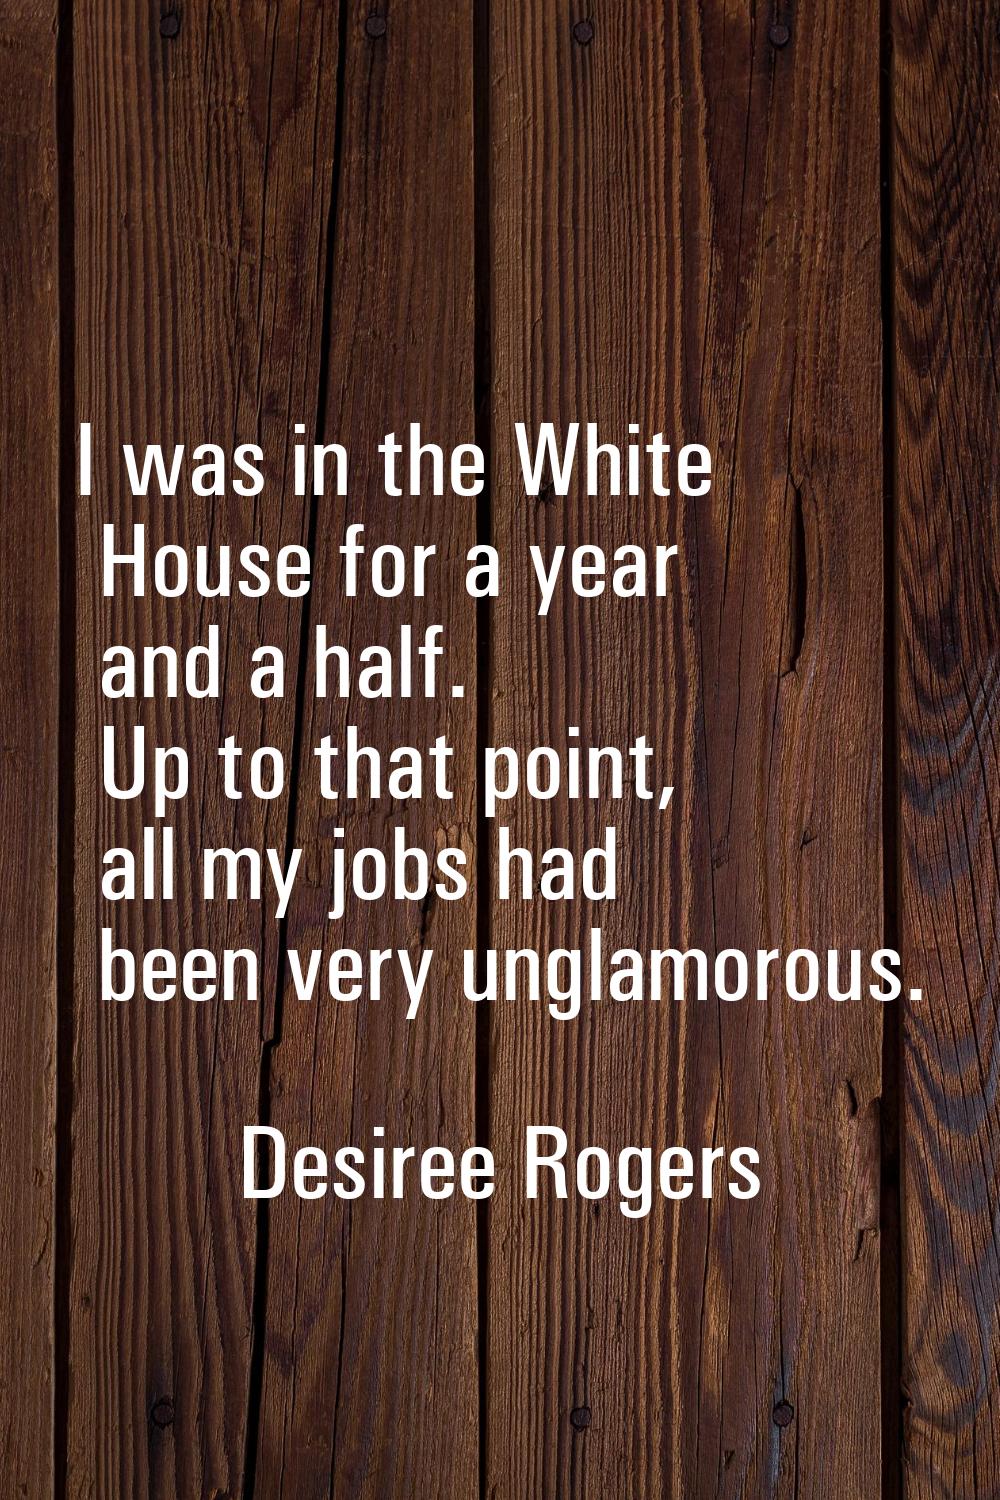 I was in the White House for a year and a half. Up to that point, all my jobs had been very unglamo